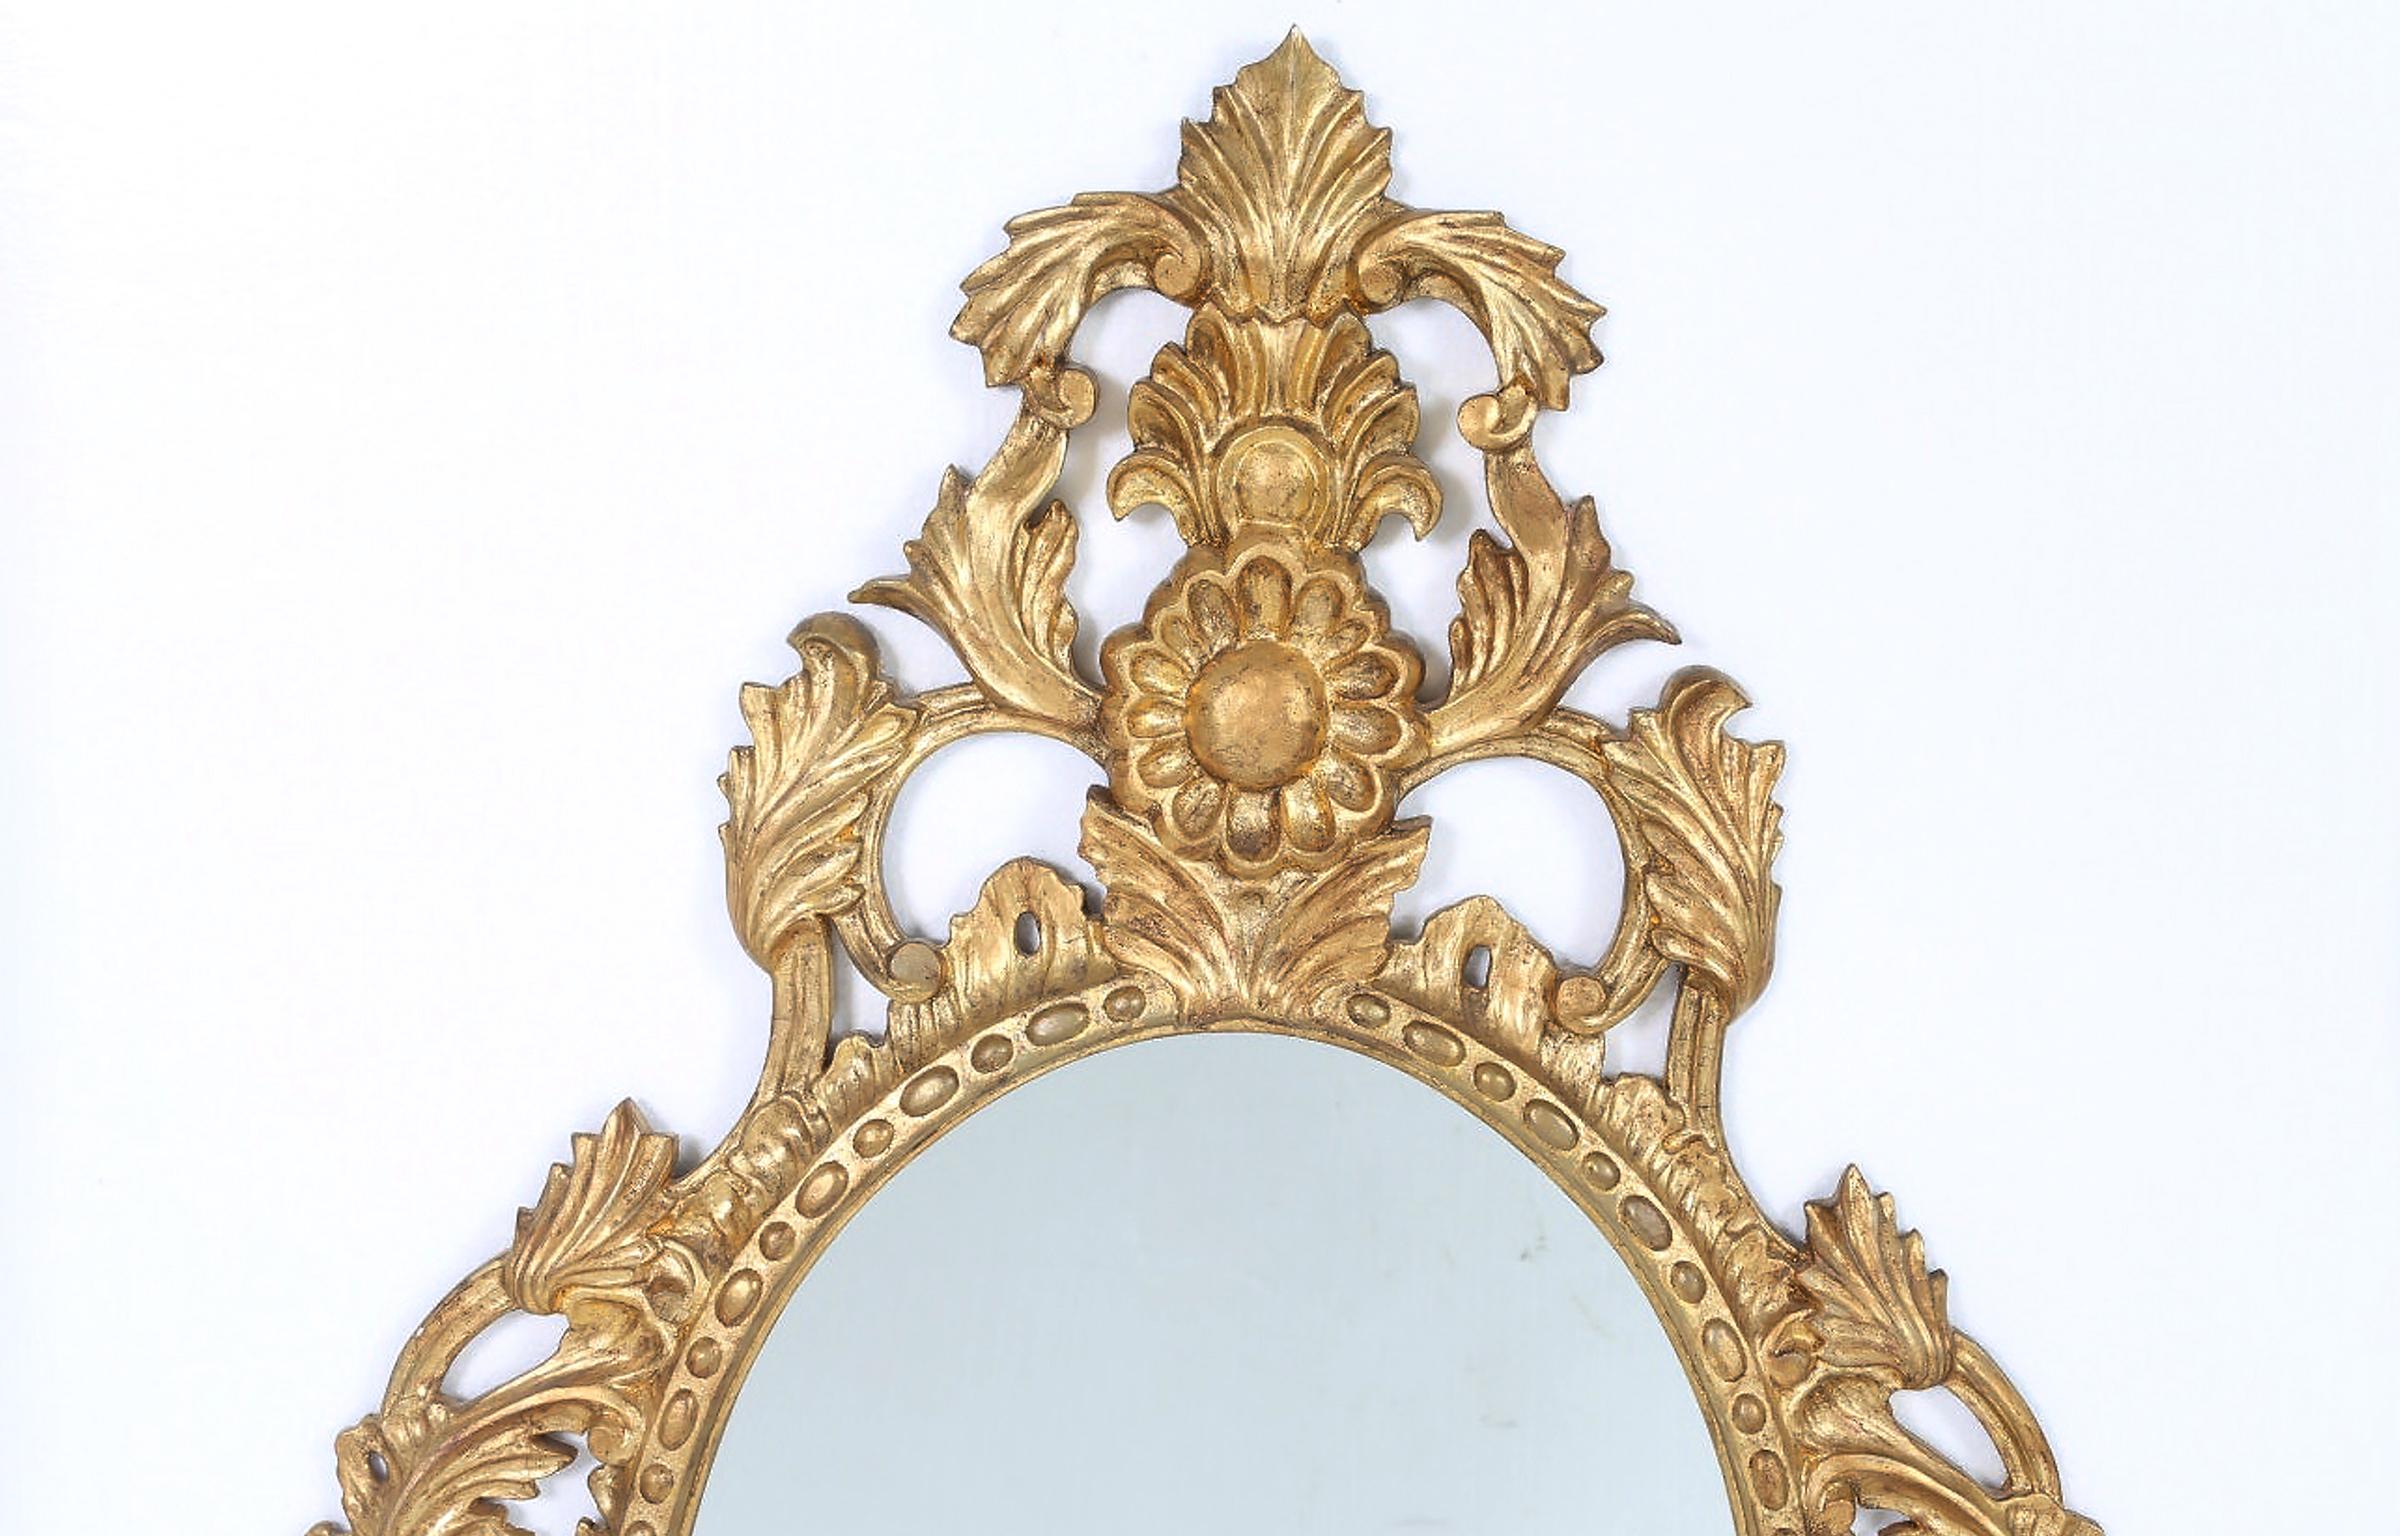 Pair of late 20th century giltwood frame hanging wall mirror. Each mirror is in good vintage condition with appropriate wear consistent with age / use. Each mirror measure about 44 inches high x 26 inches wide.